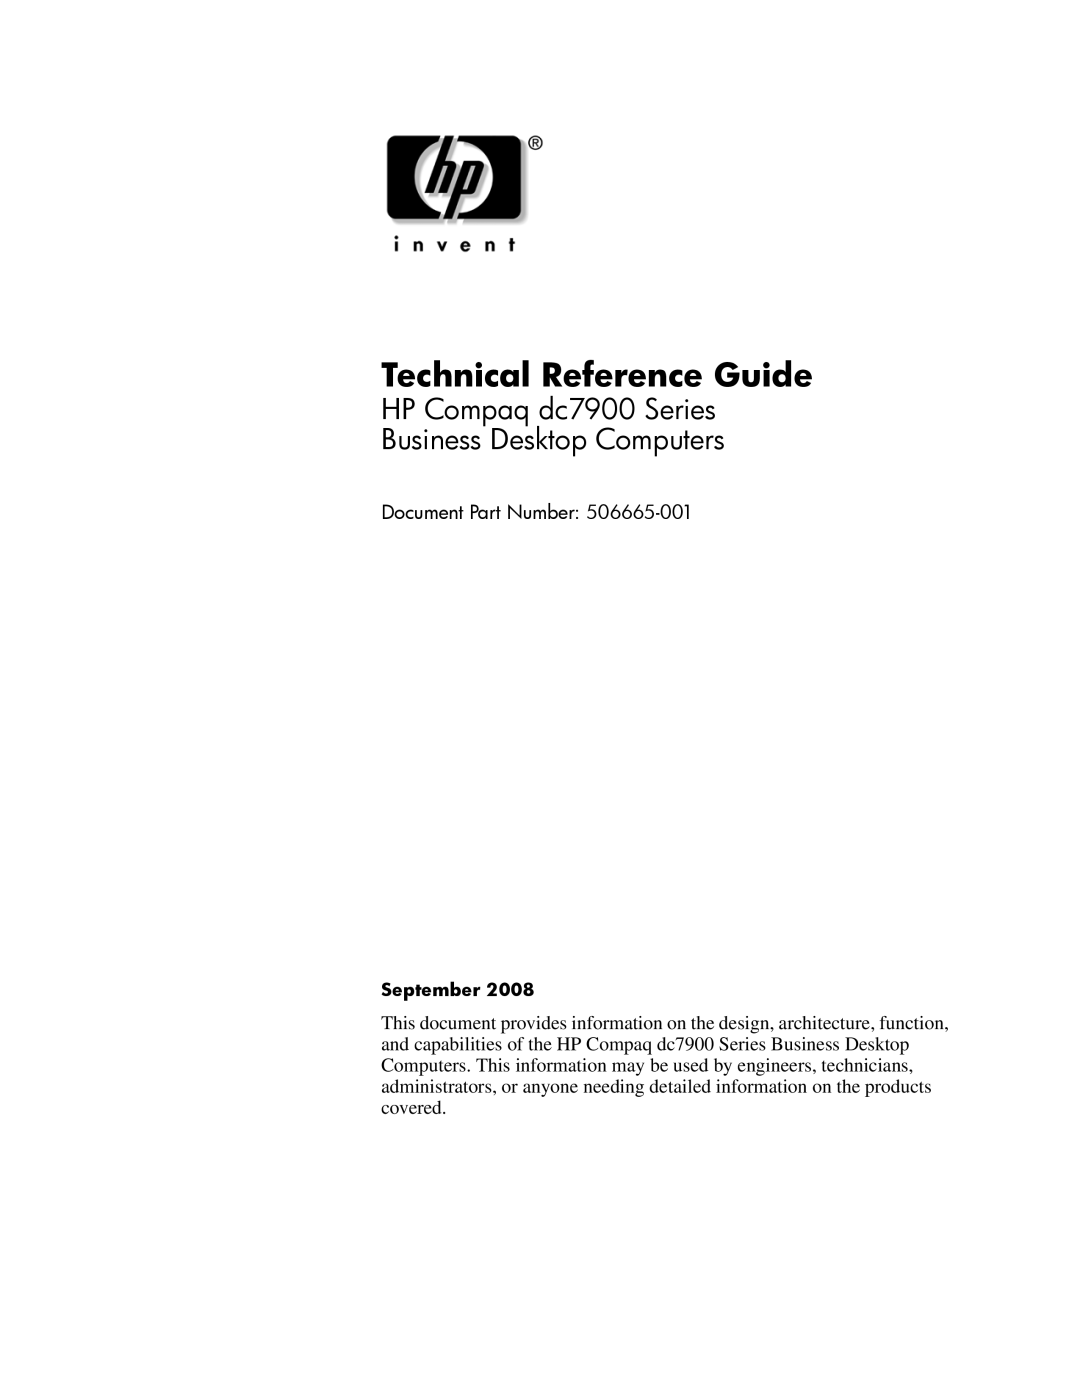 HP dc7800 tower manual Technical Reference Guide, September 